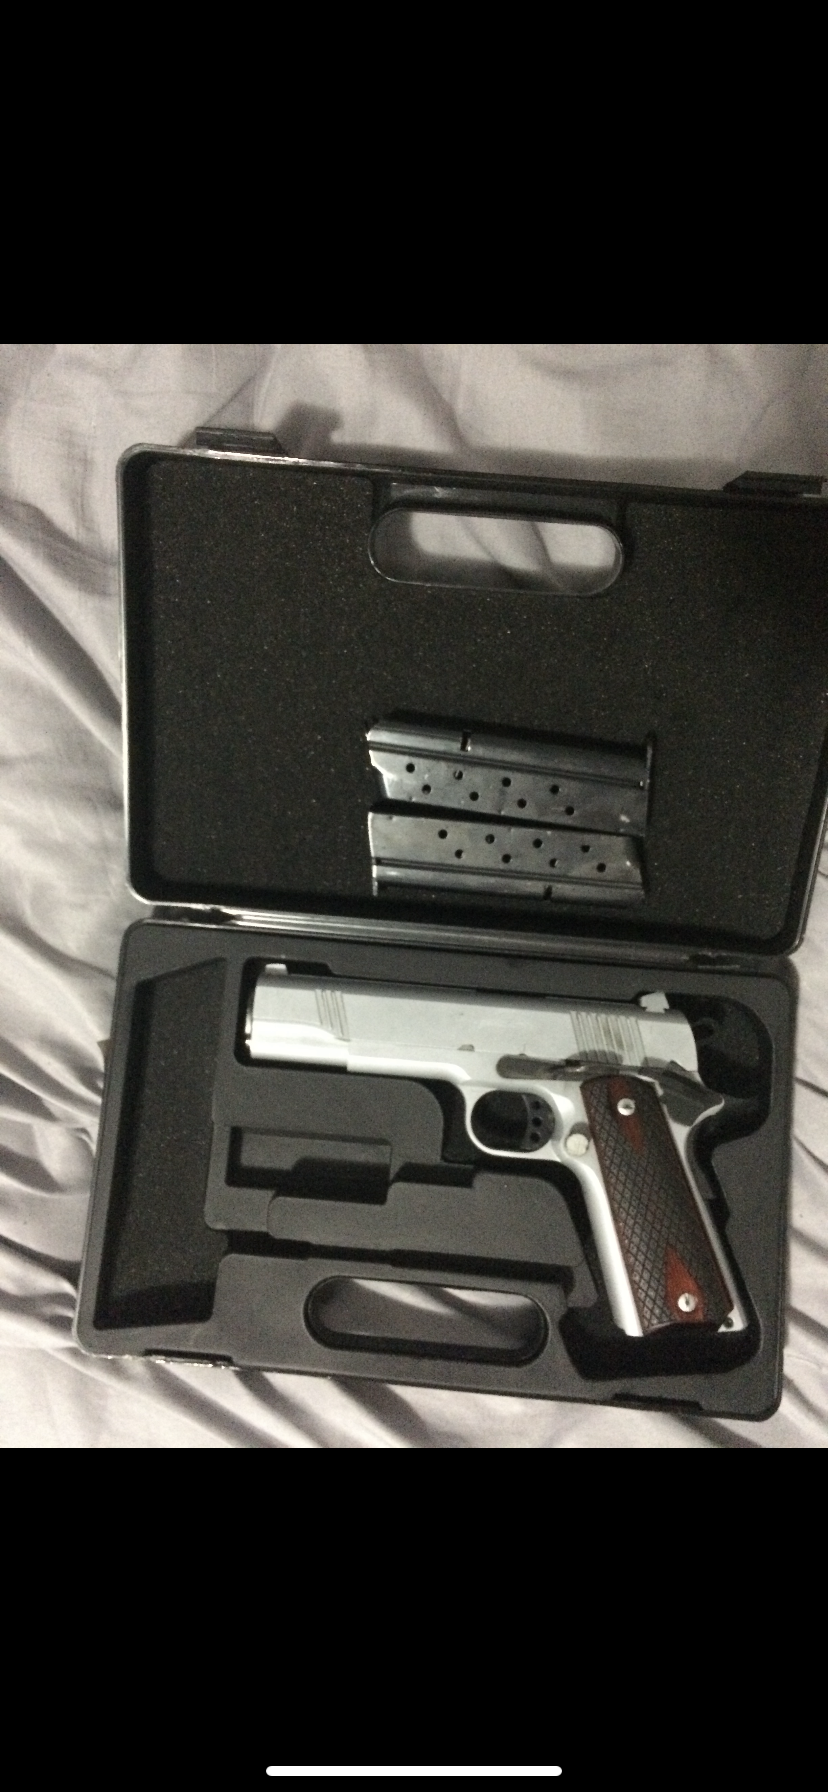 The firearm is described as a silver Norinco 1911, 9mm handgun with brown grips and contains two magazines.